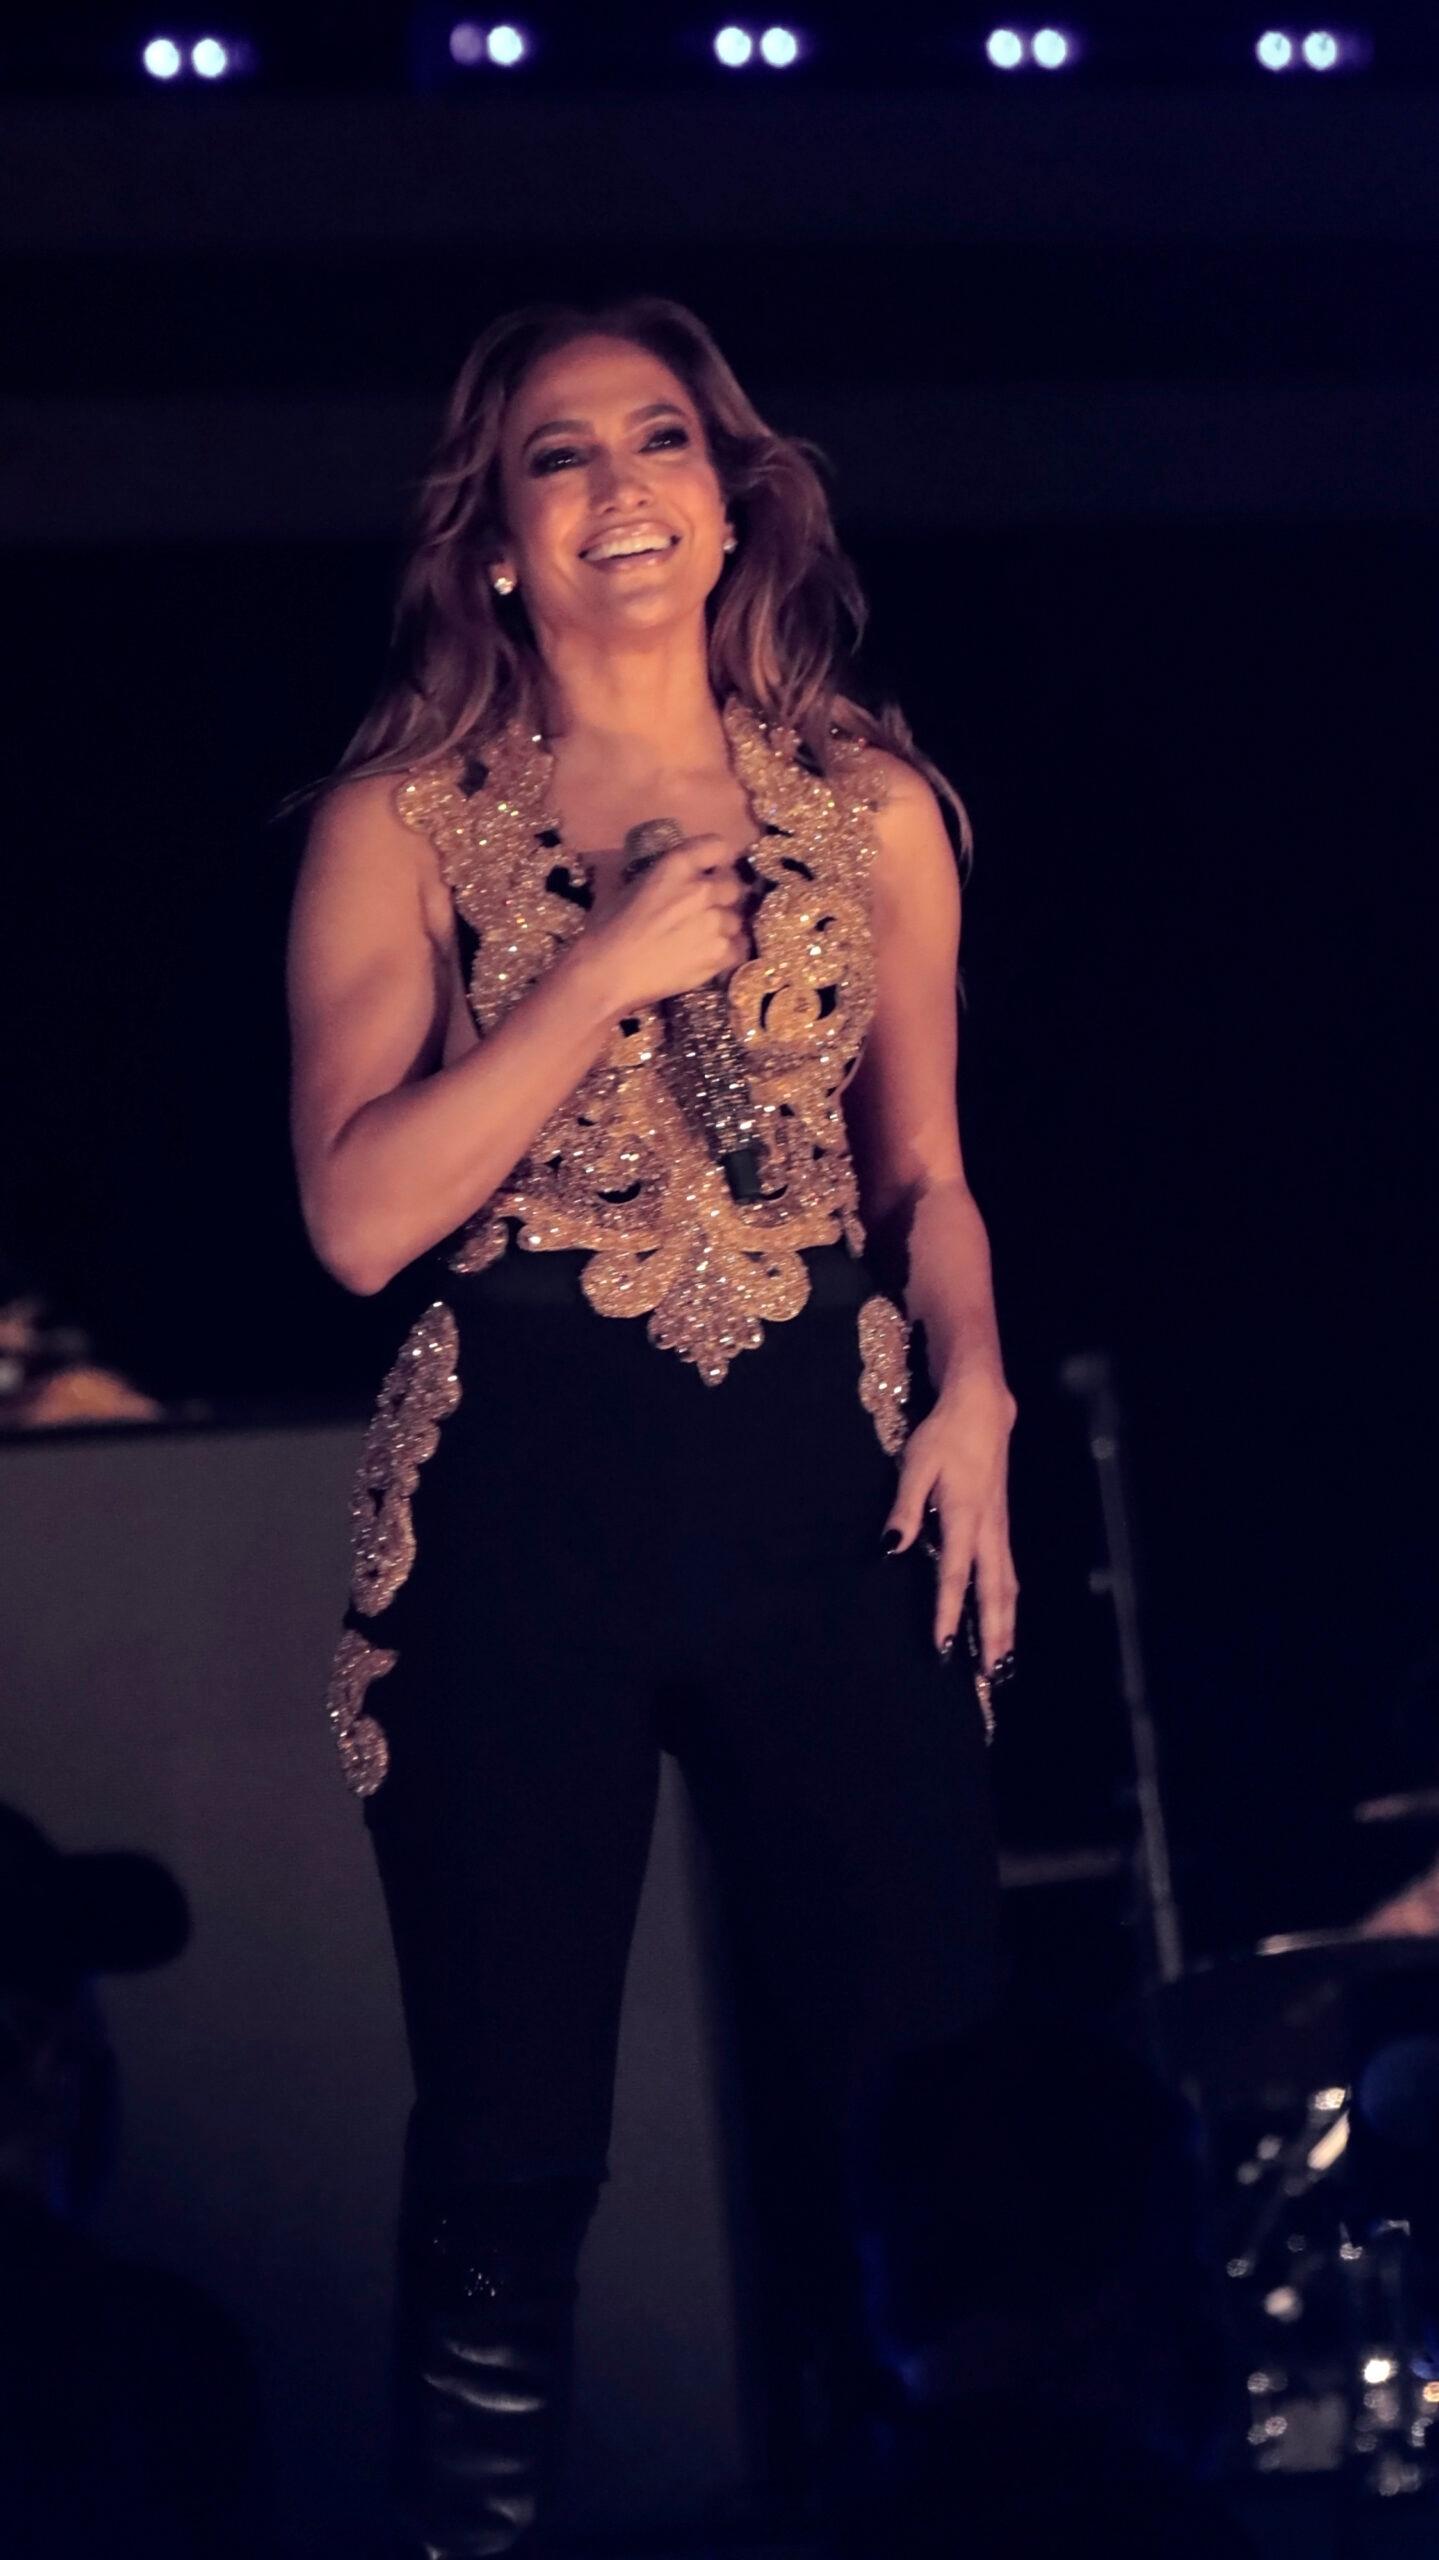 Jennifer Lopez performing at the 2021 Global Citizen concert in Central Park